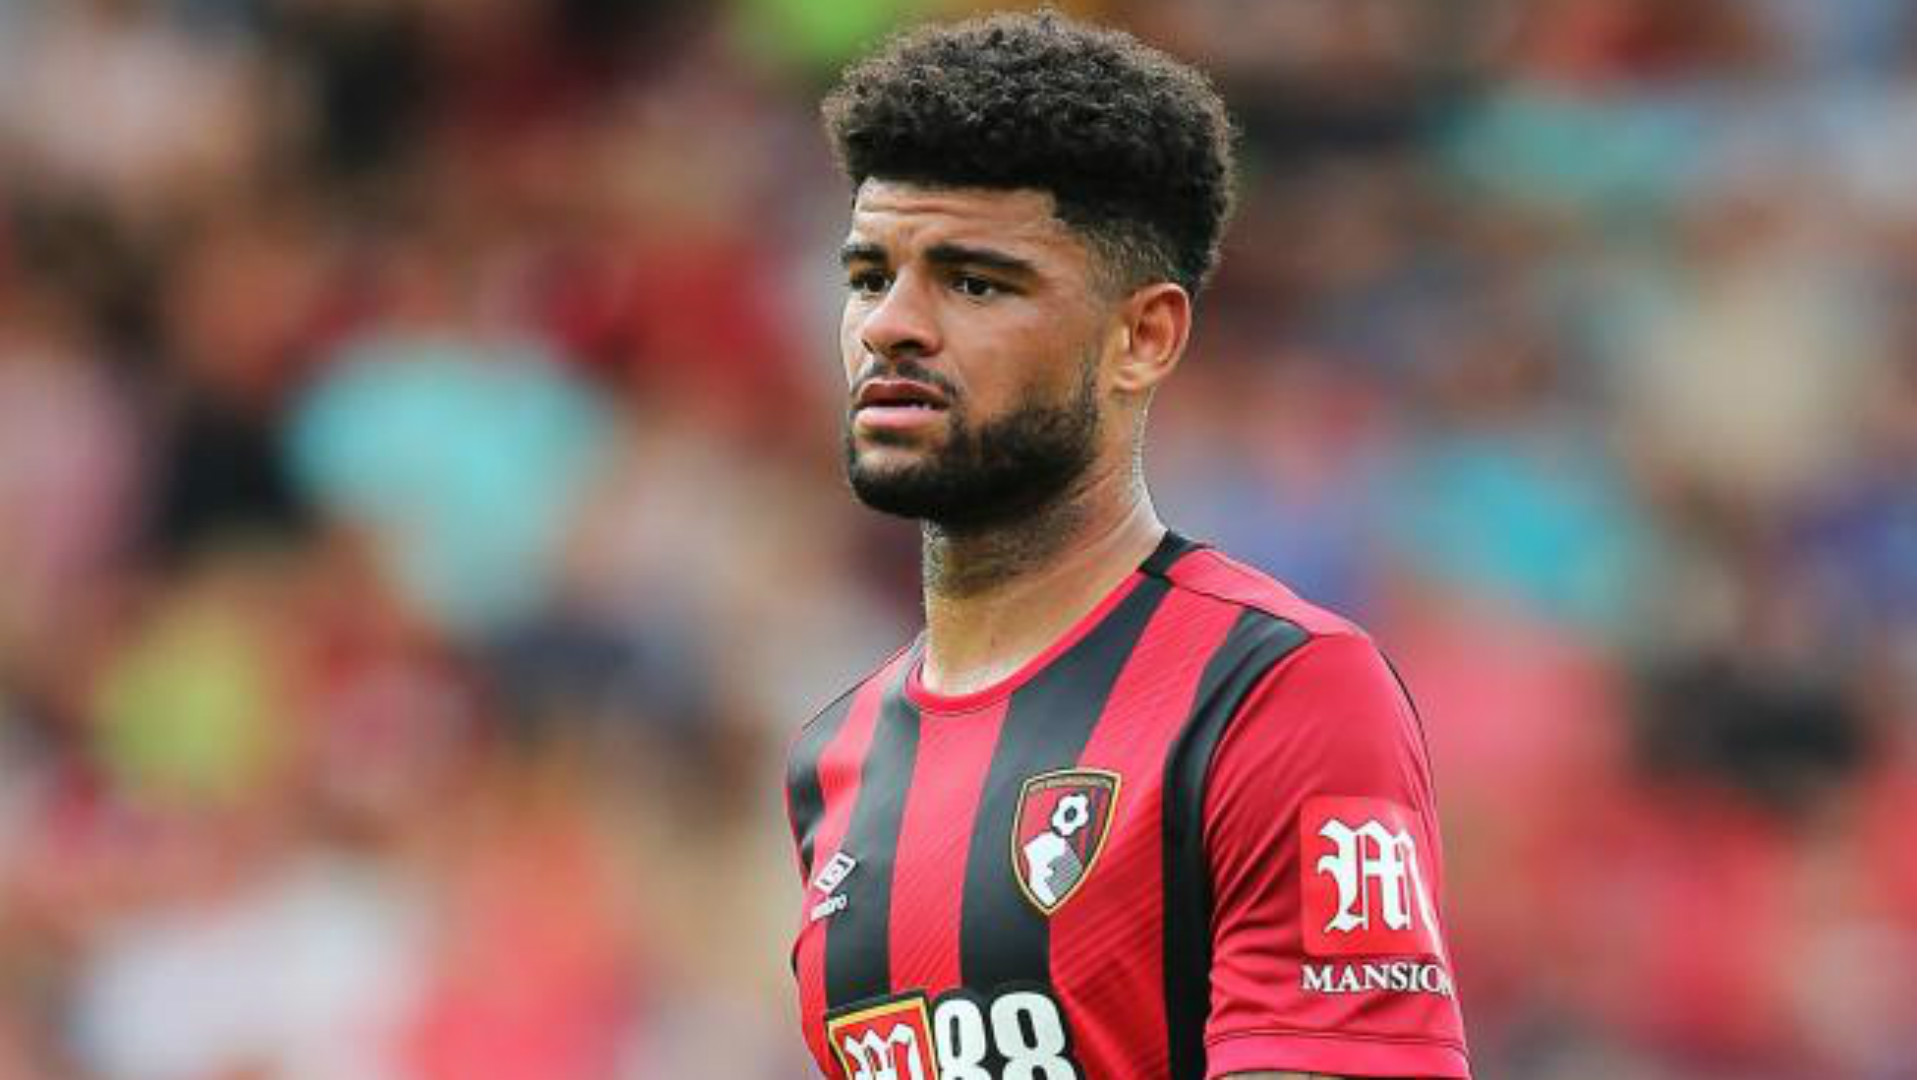 Philip Billing Age, Salary, Net worth, Current Teams, Career, Height, and much more